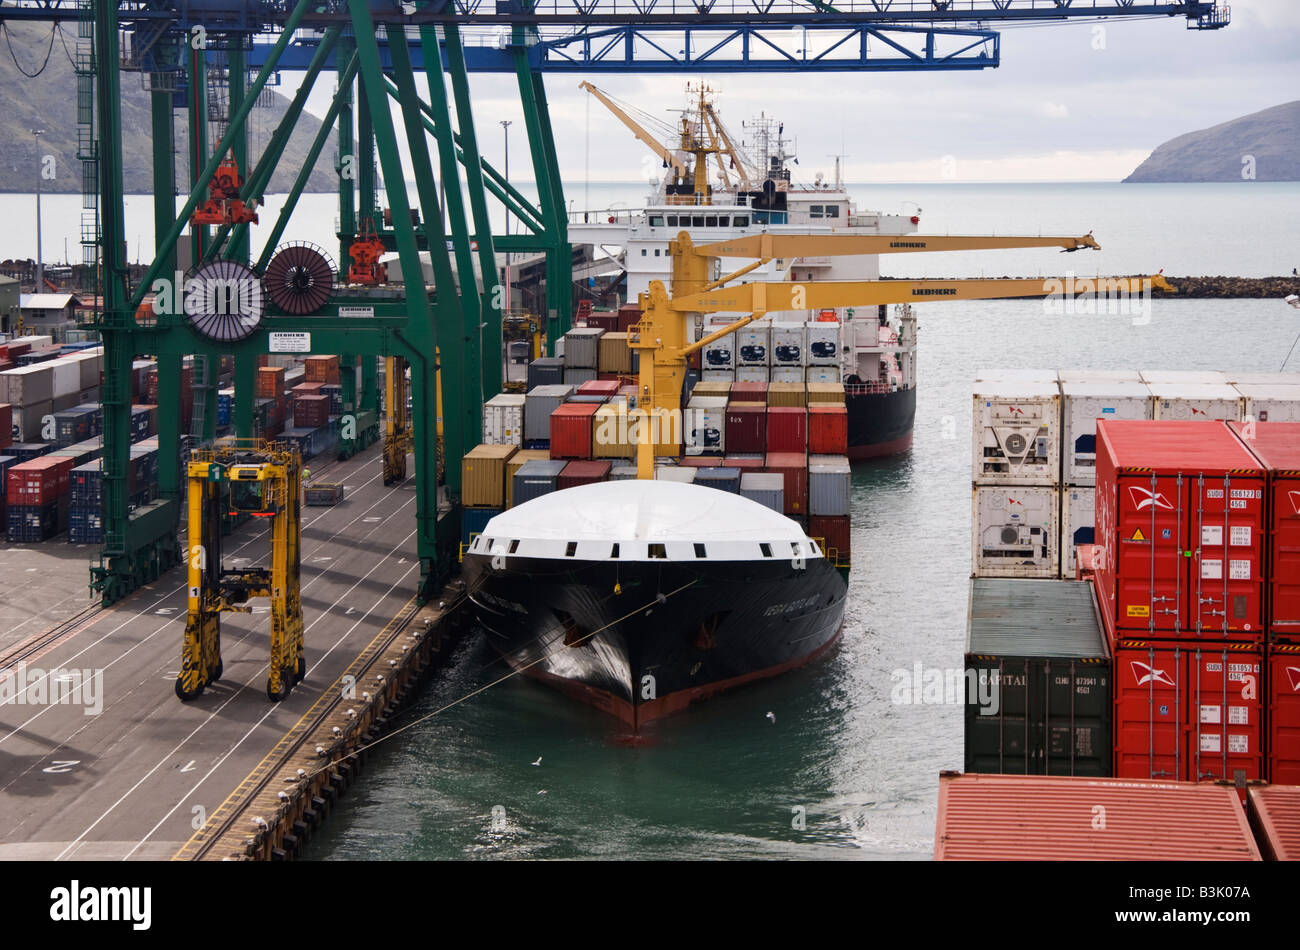 A view along the quayside of a container terminal from a ship that has just left the dock. Stock Photo